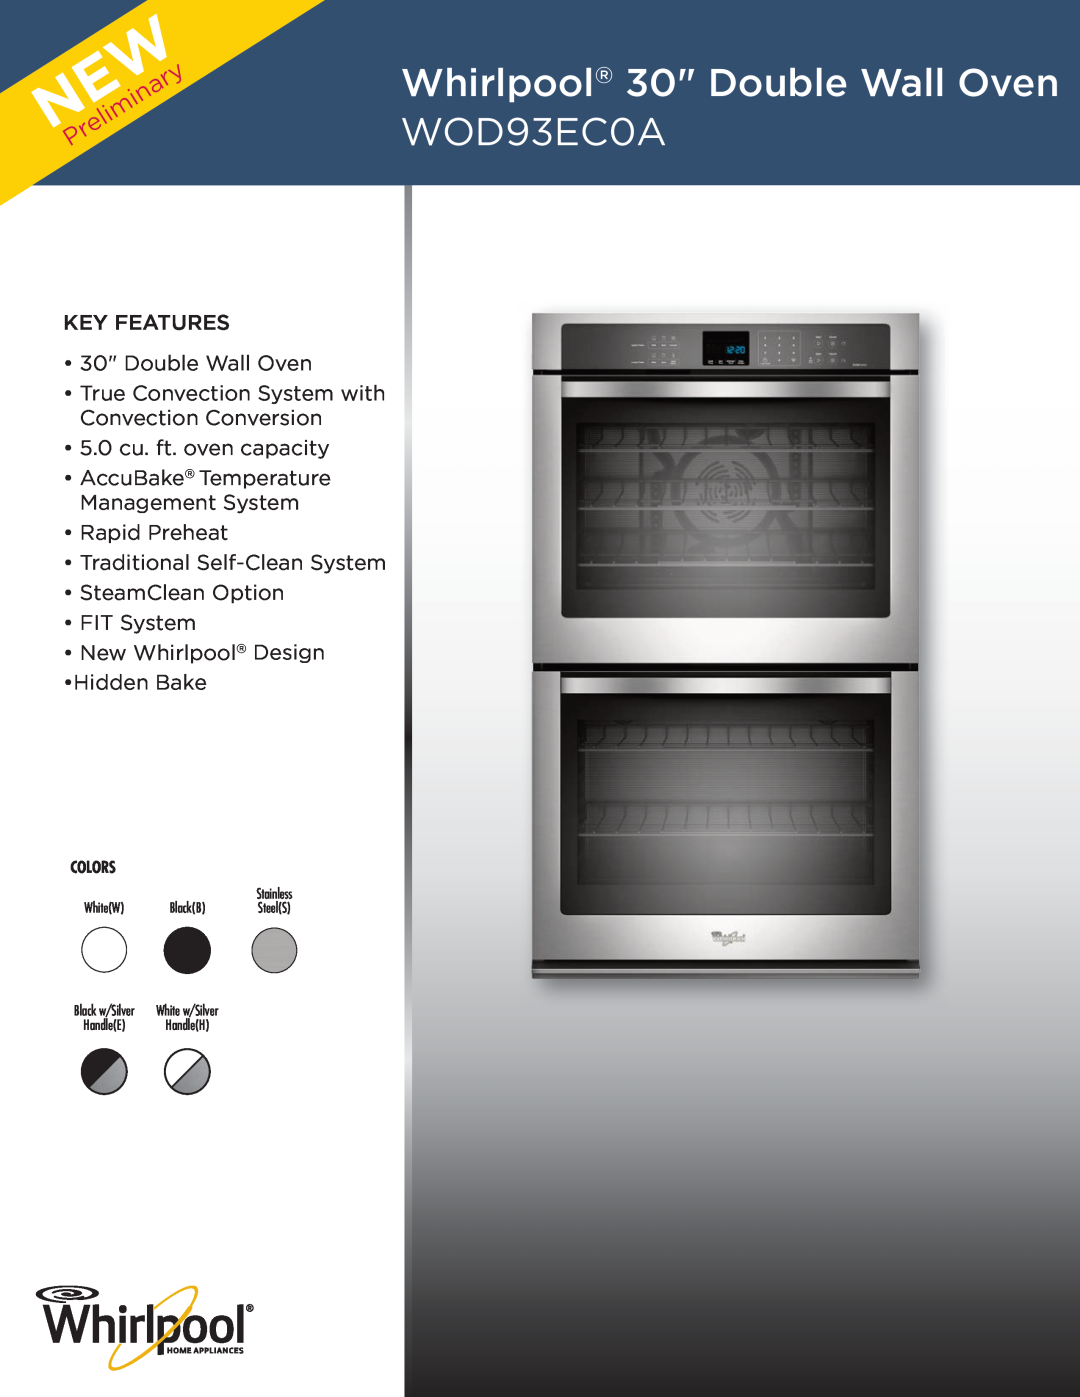 Whirlpool WOS51EC0A Whirlpool 30 Double Wall Oven wod93ec0a, NEWPreliminary, key features 30 Double Wall Oven, Colors 